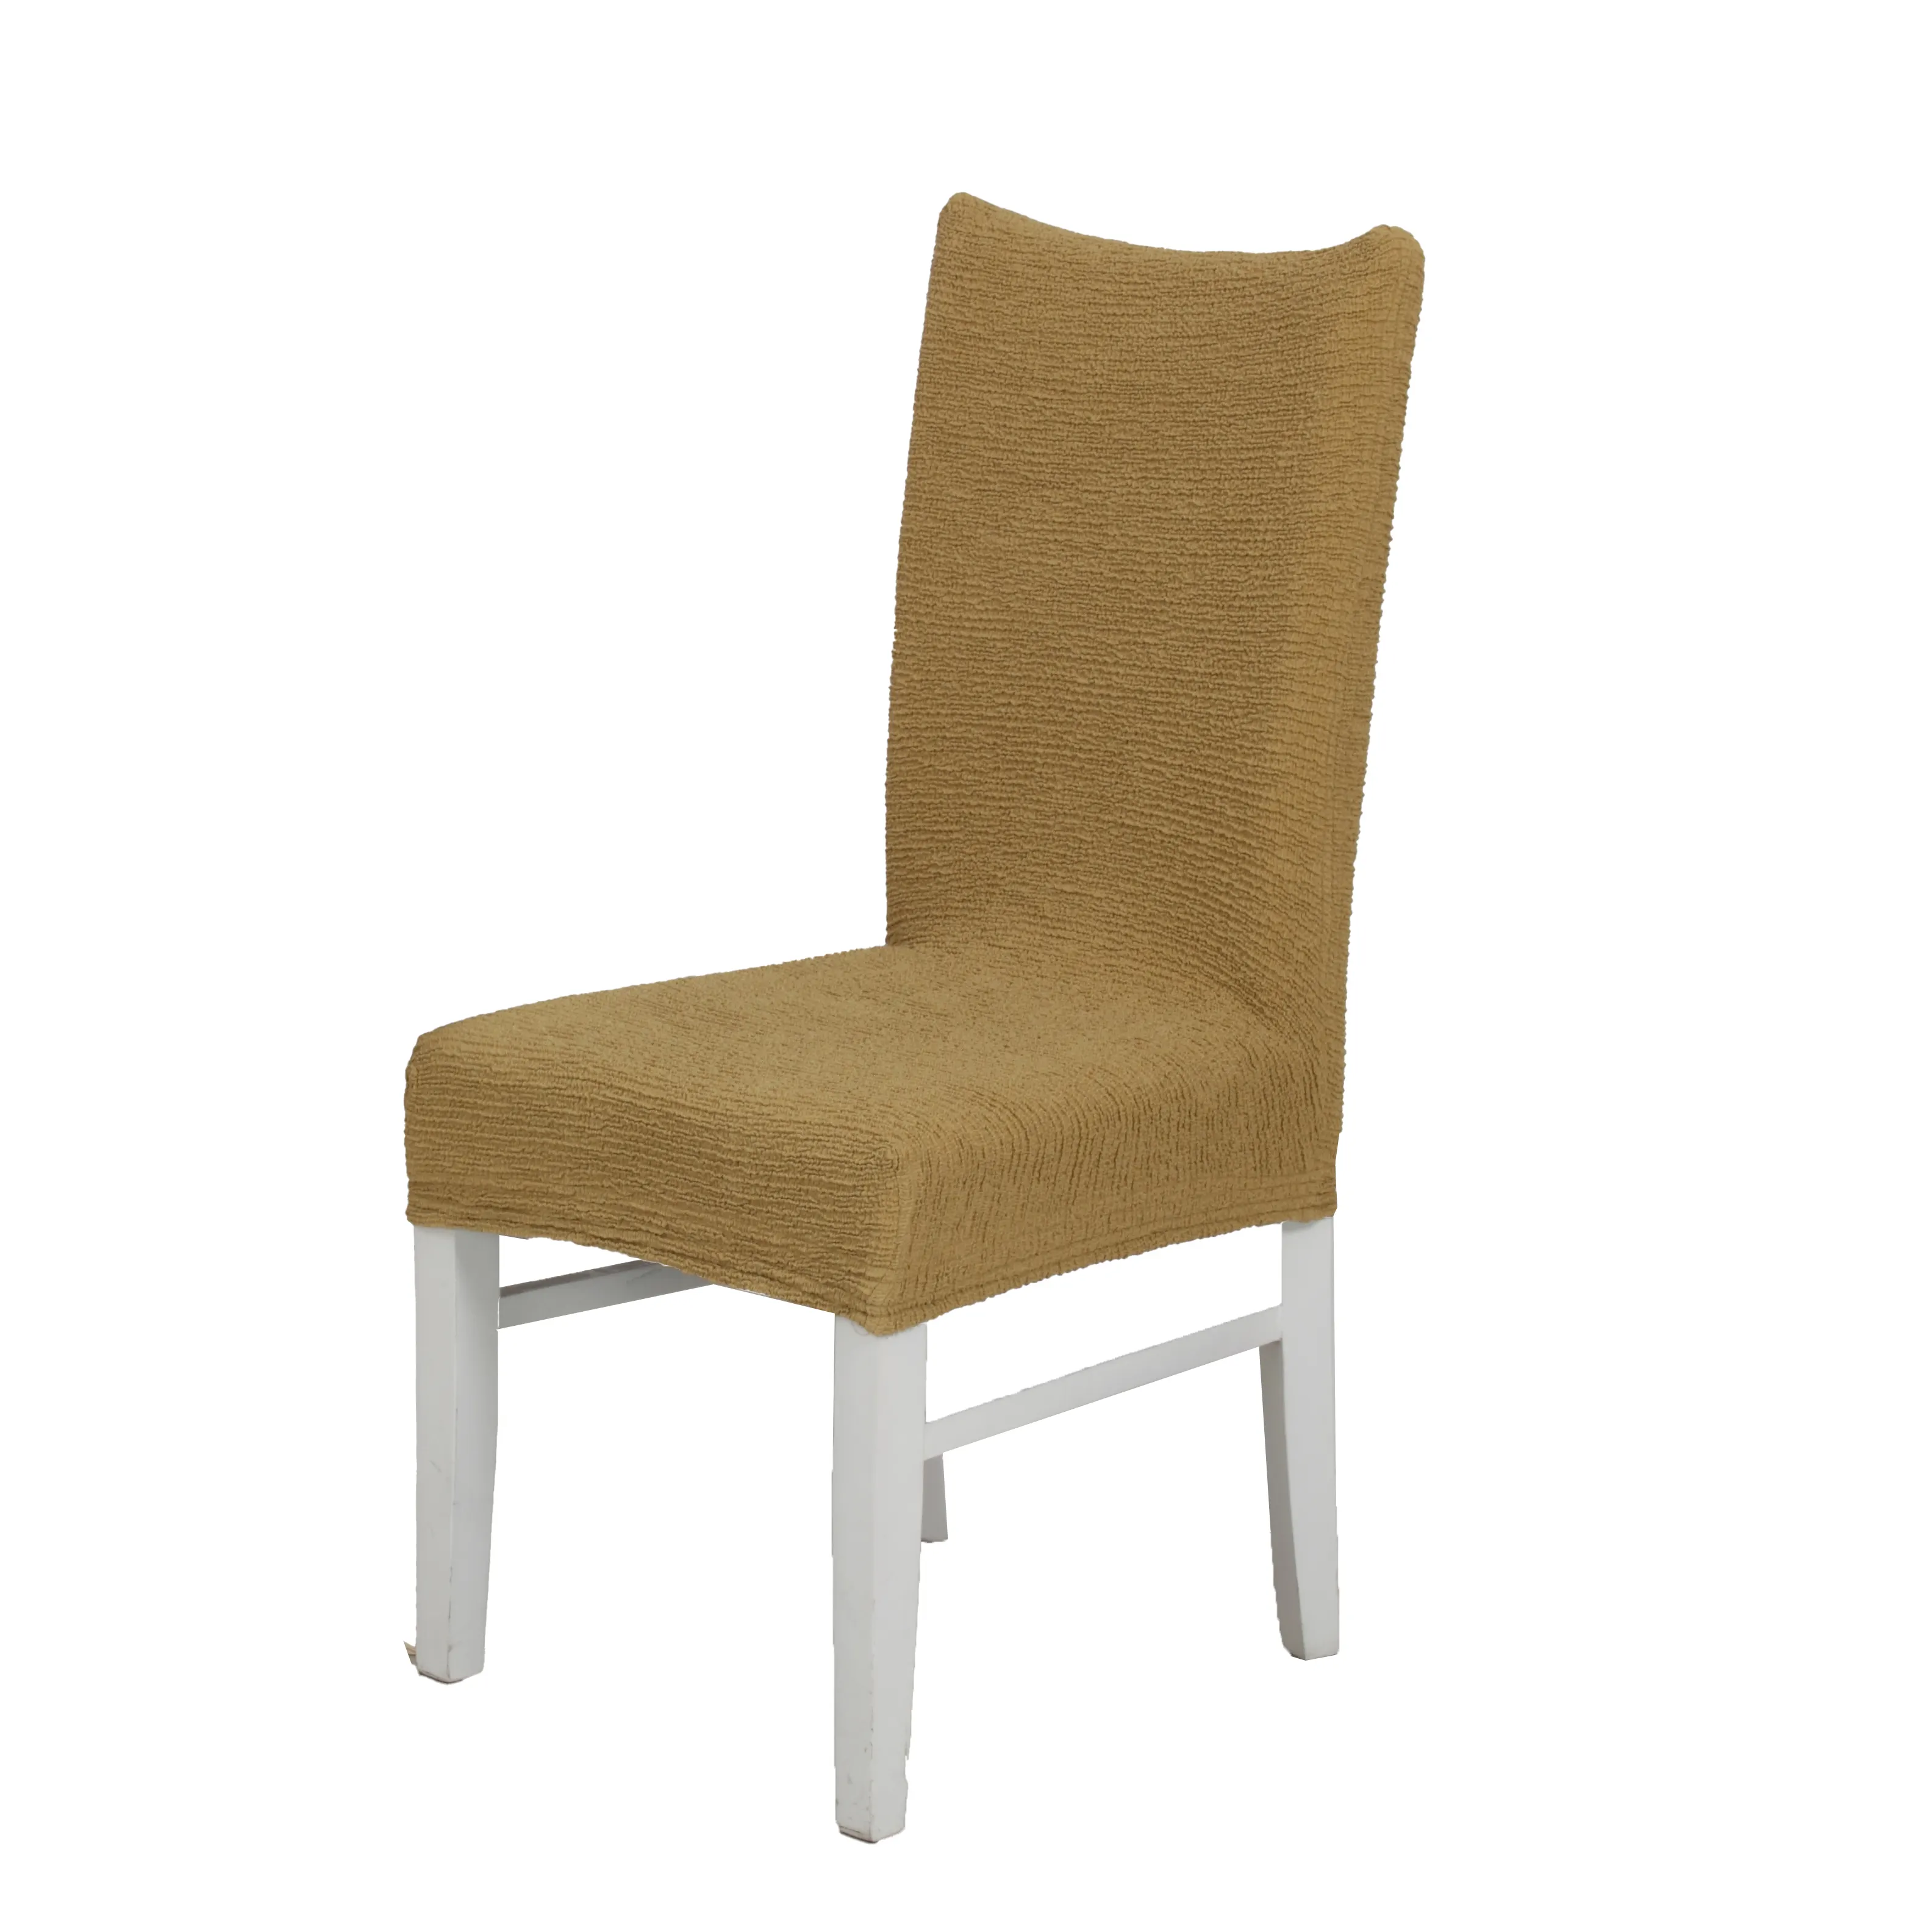 WHolesale high quality custom dining kitchen chair covers christmas decoration universal chair covers